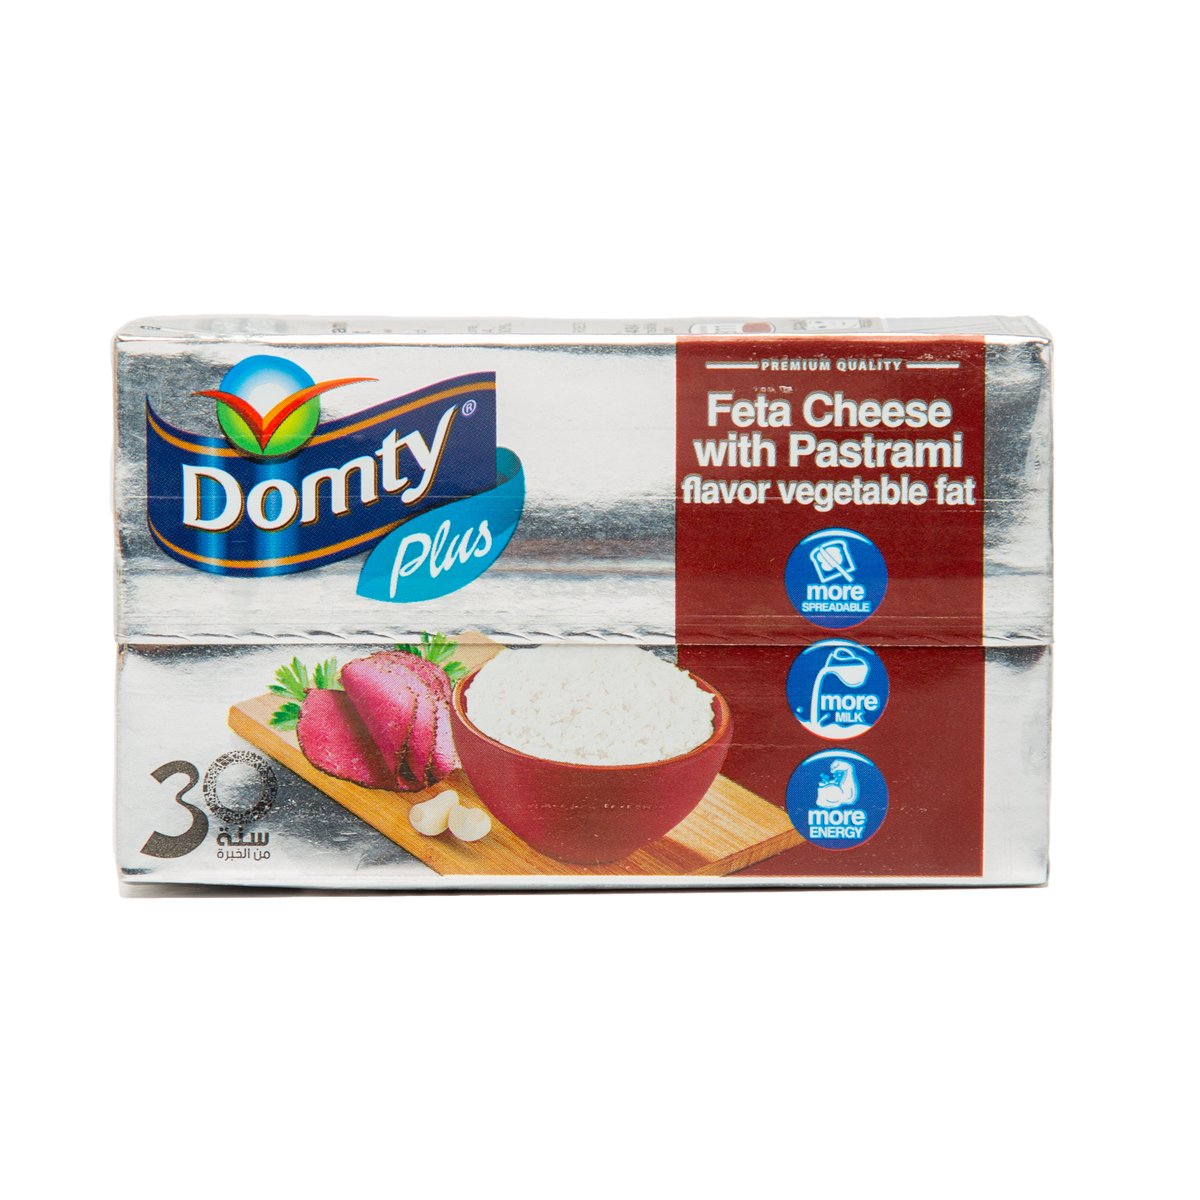 Domty Plus Feta Cheese With Pastrami 250 g